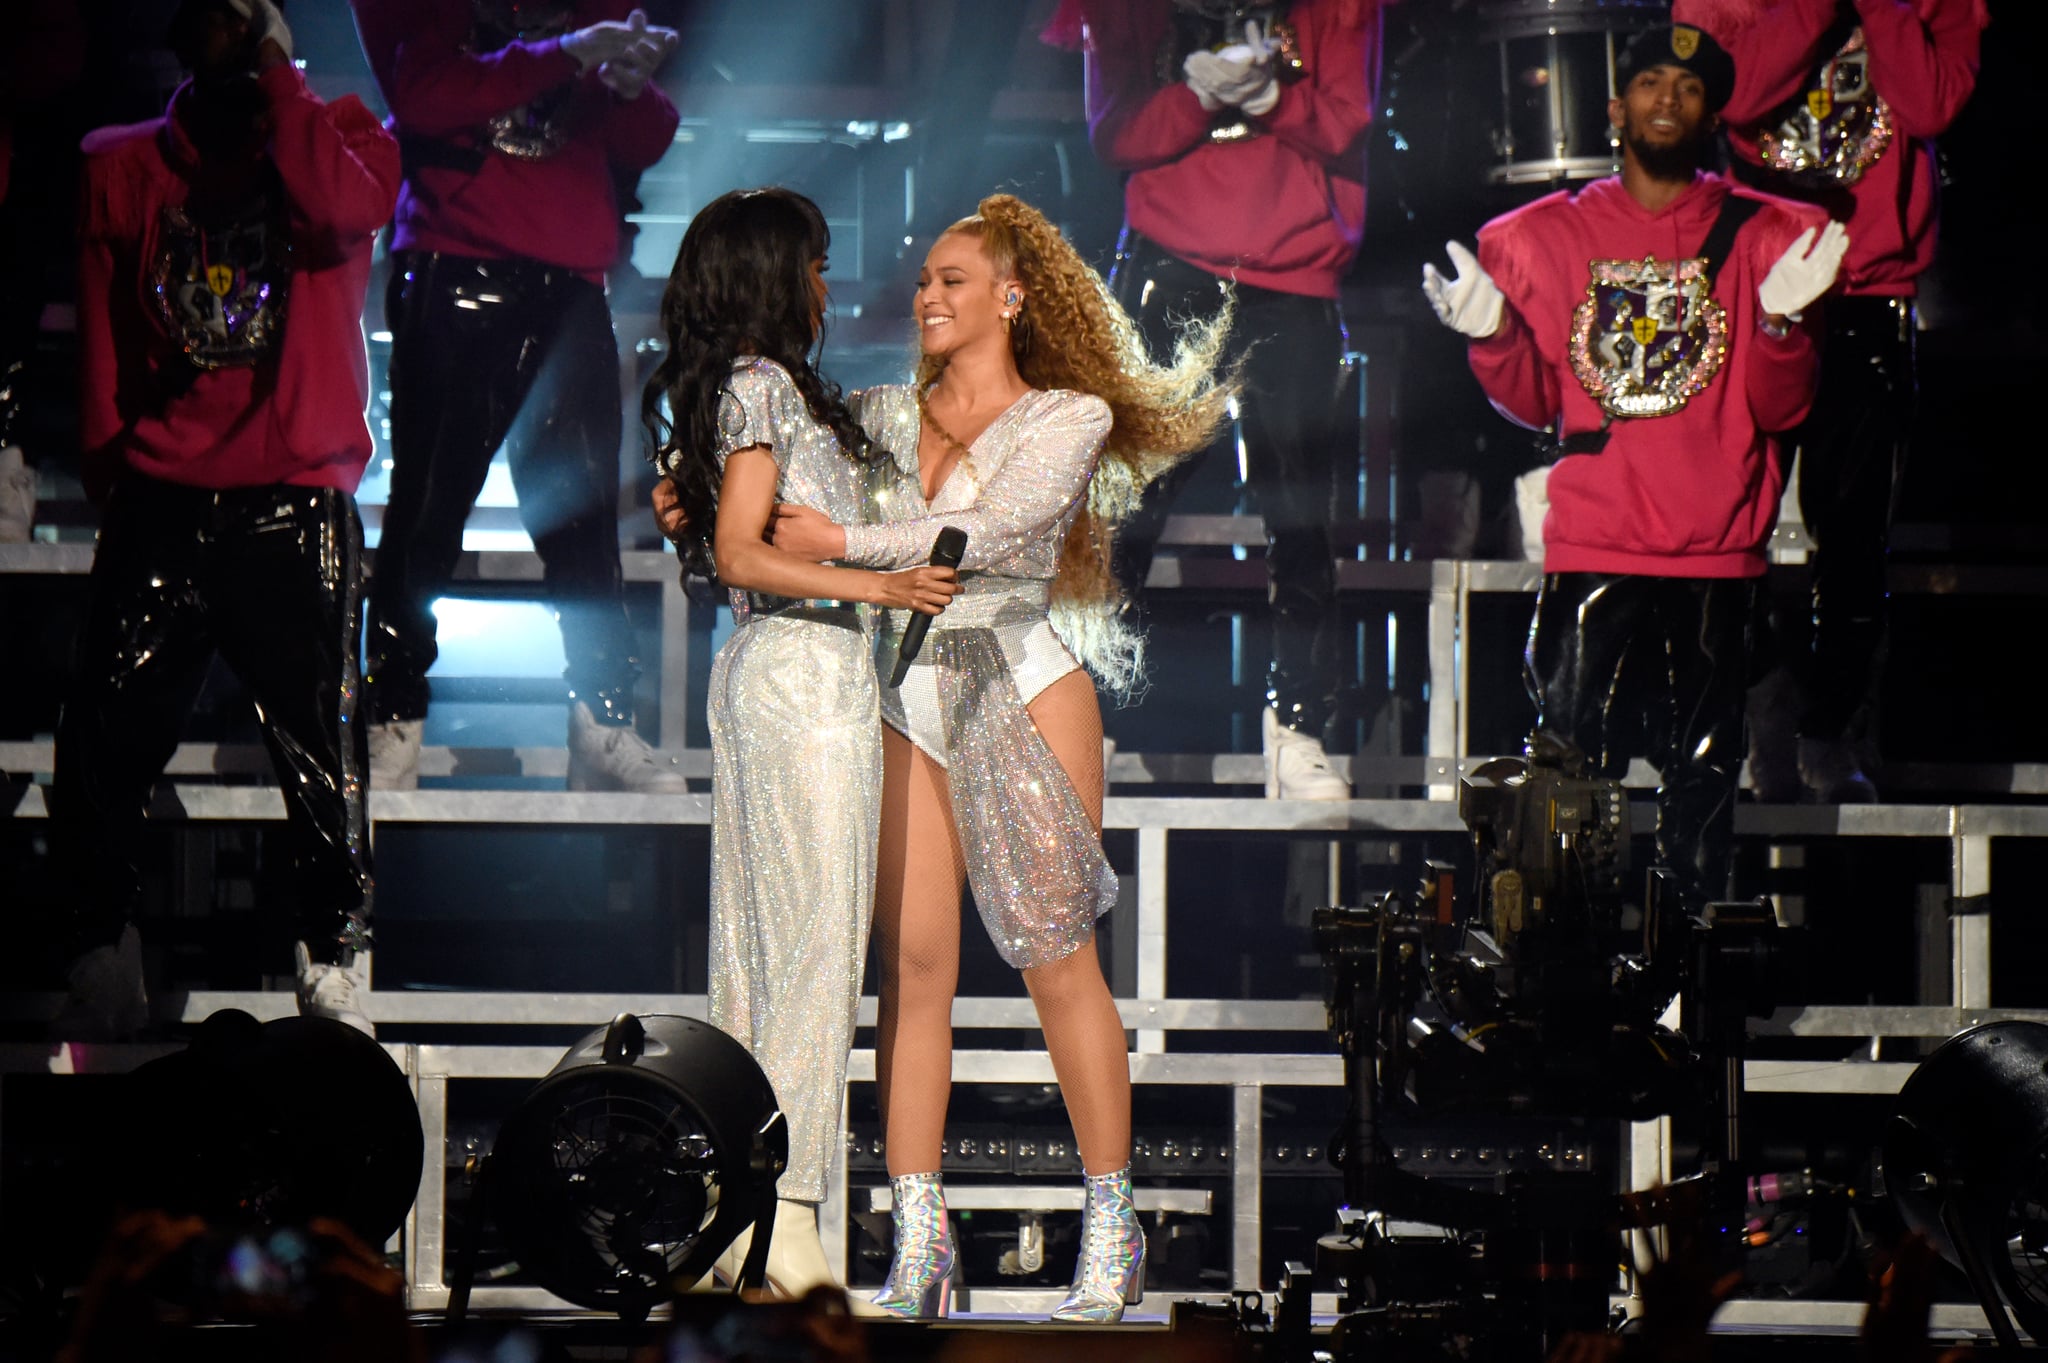 INDIO, CA - APRIL 21:  Michelle Williams and Beyonce Knowles of Destiny's Child perform onstage during the 2018 Coachella Valley Music And Arts Festival at the Empire Polo Field on April 21, 2018 in Indio, California.  (Photo by Kevin Mazur/Getty Images for Coachella)